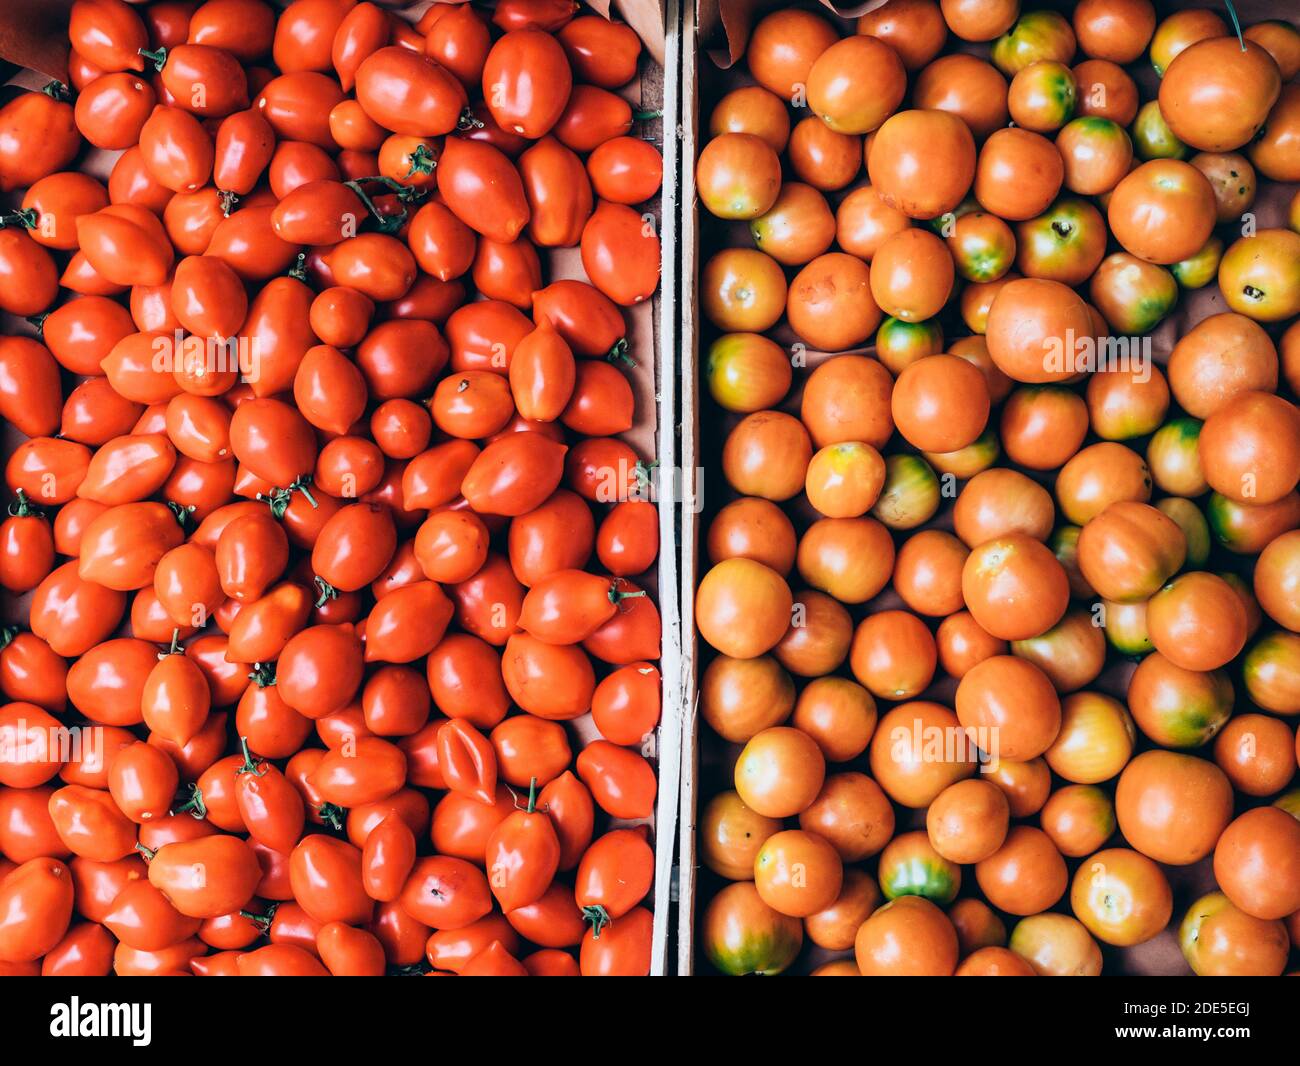 two vertical crates of fresh Italian yellow and red tomatoes just picked from the countryside Stock Photo